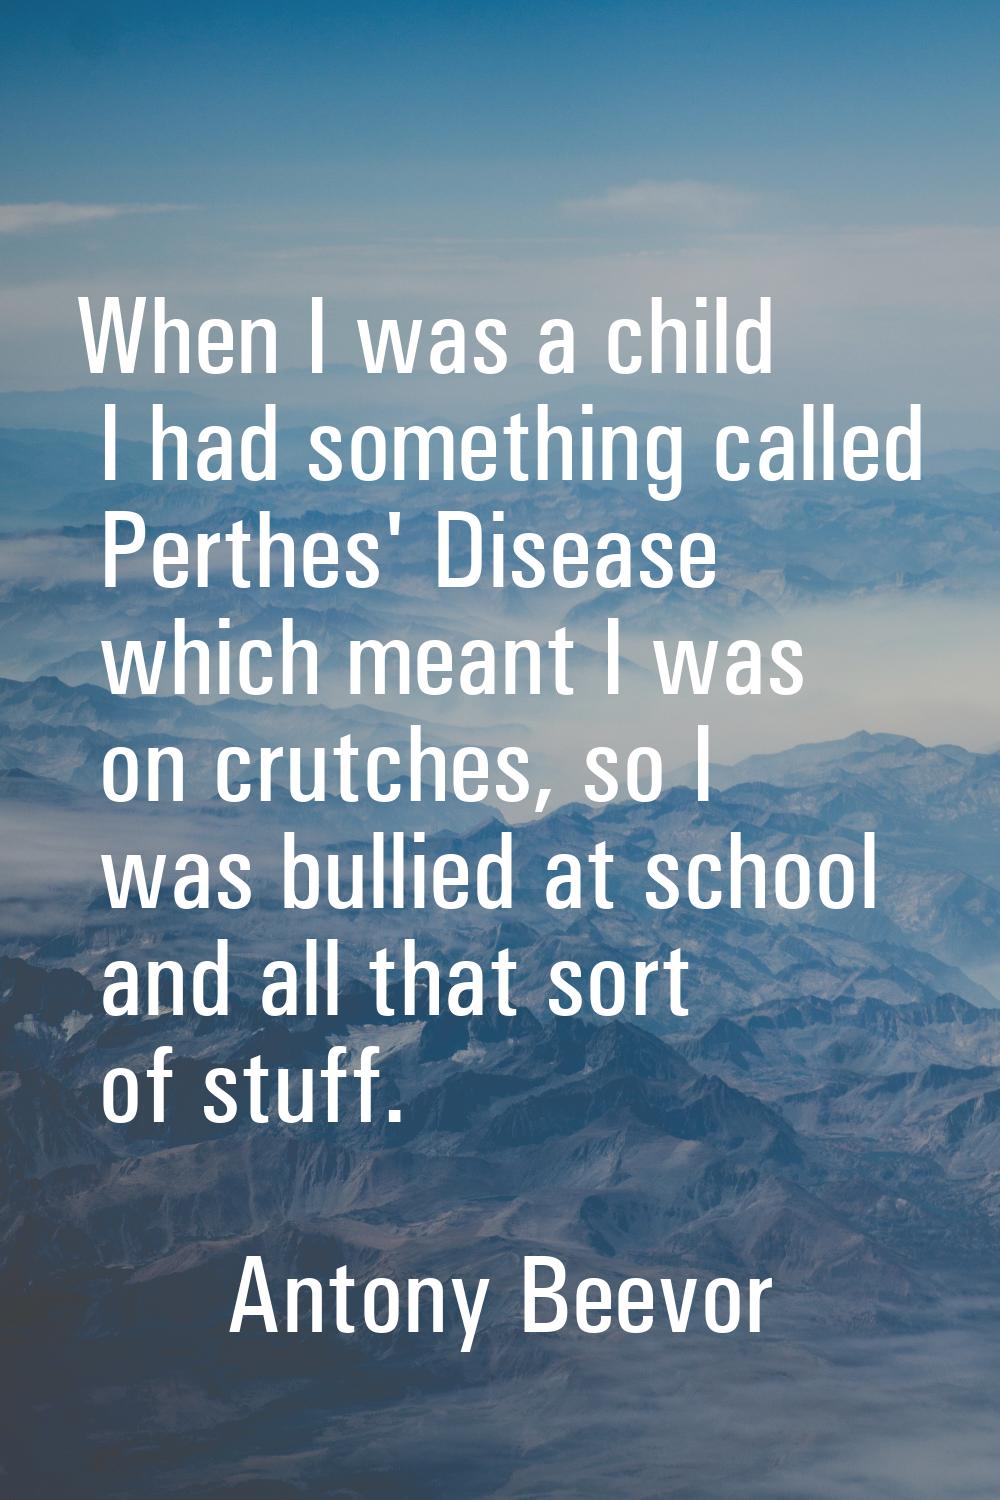 When I was a child I had something called Perthes' Disease which meant I was on crutches, so I was 